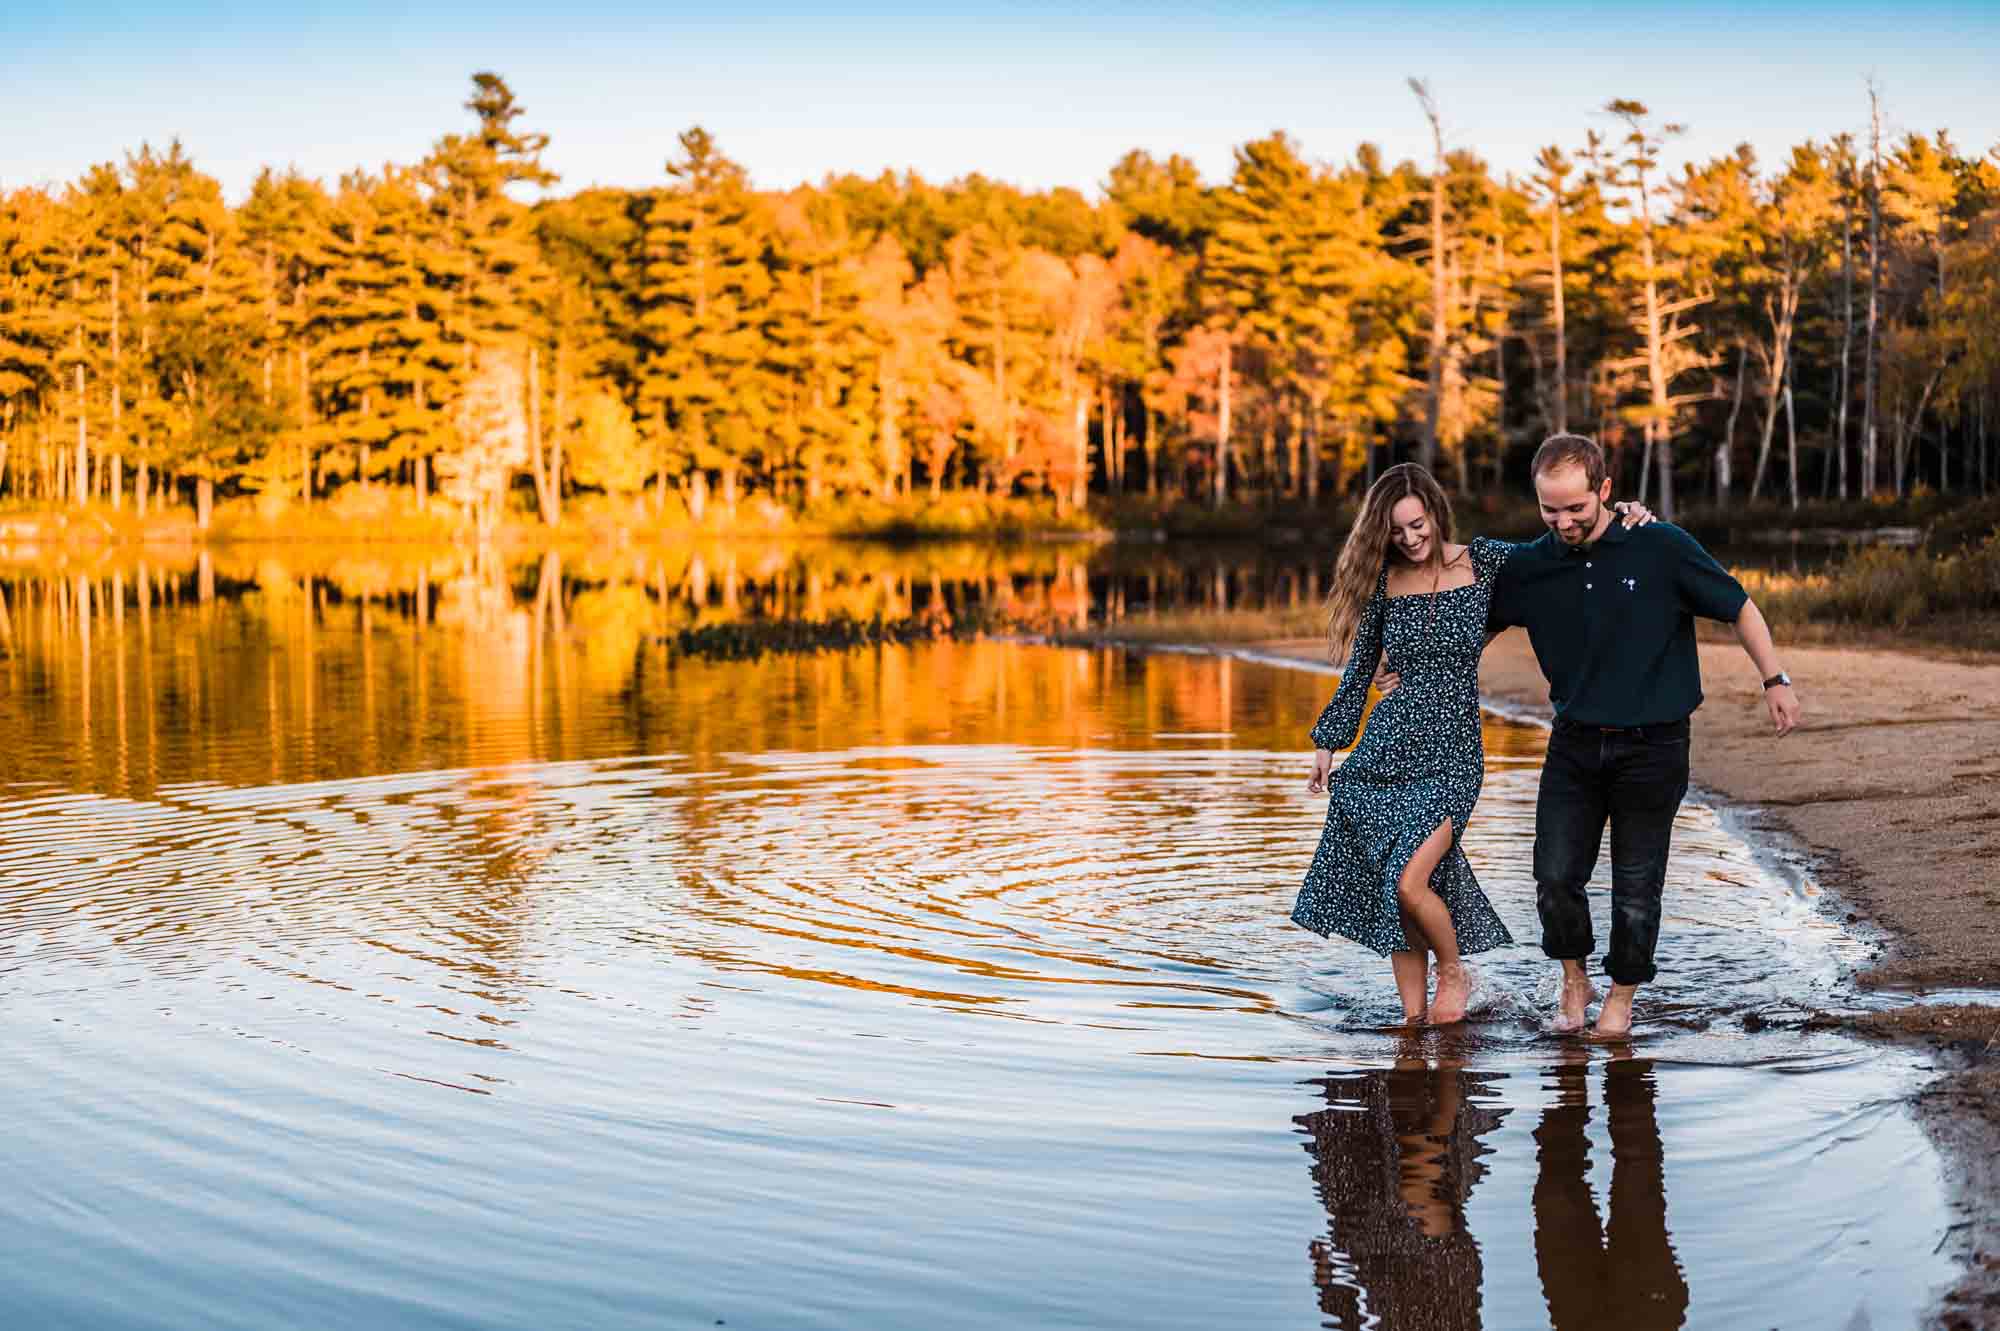 A couple dipping feet into lake in new england with forest in background